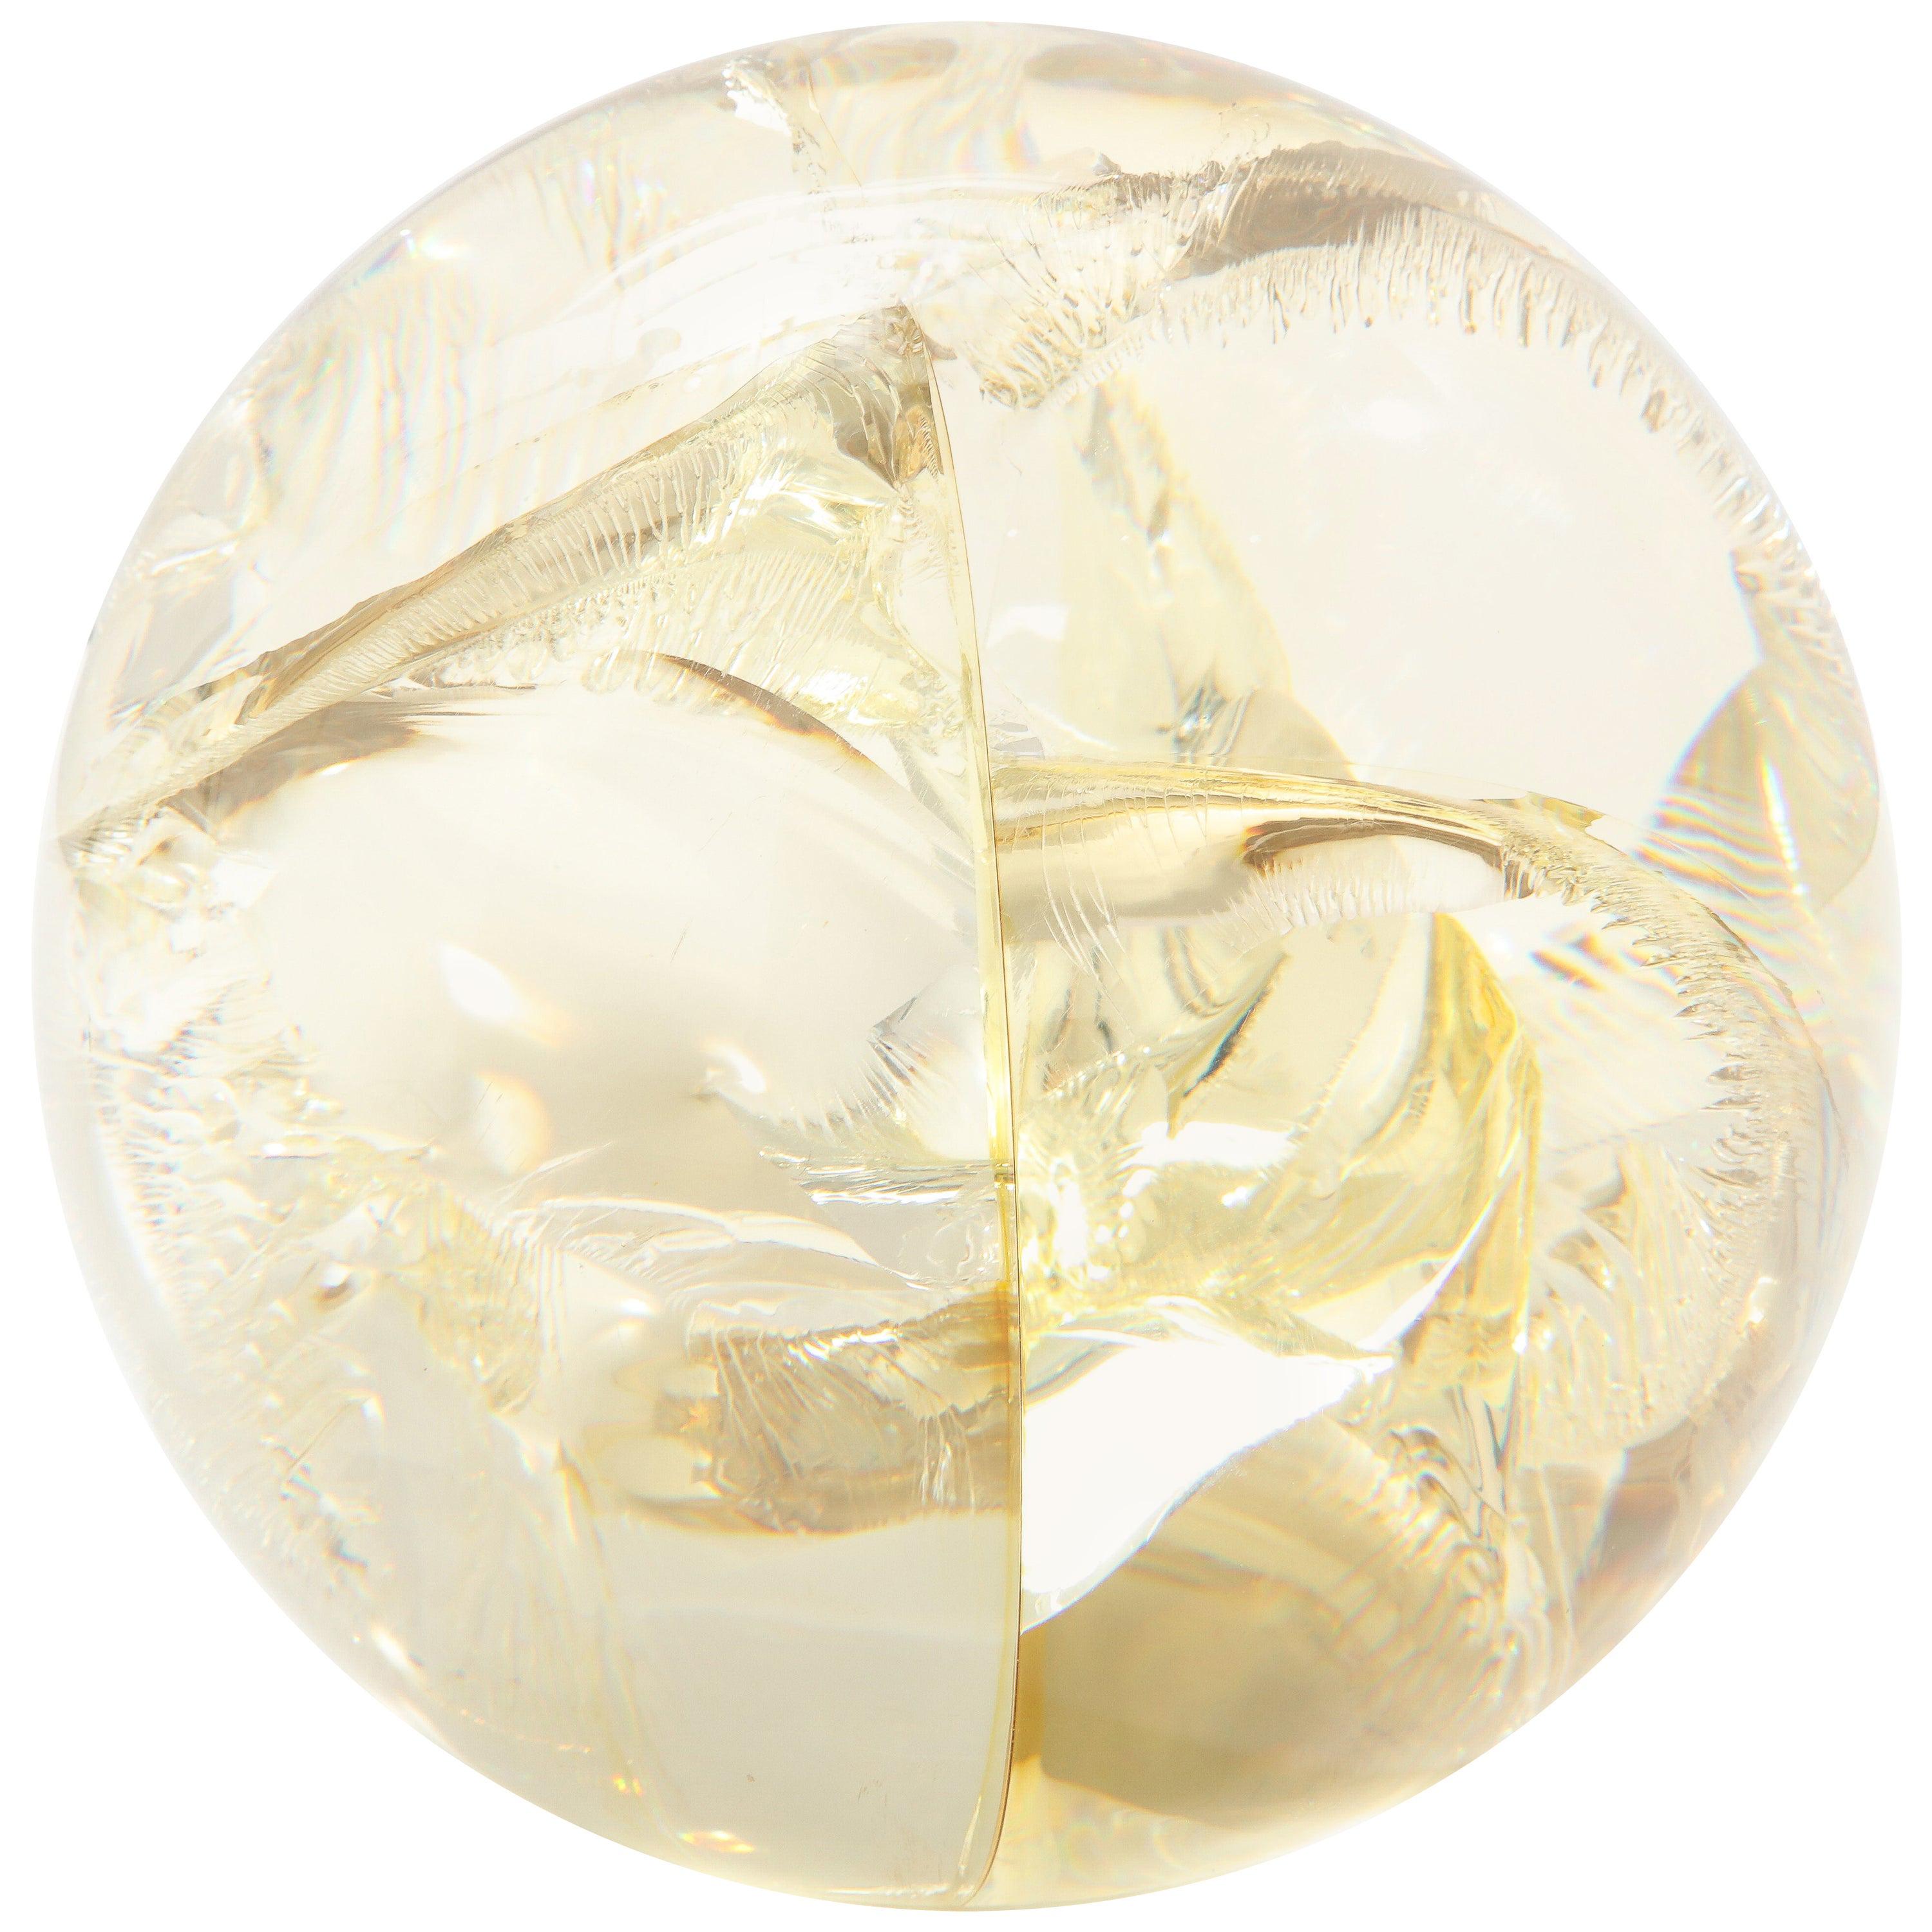 Fractured Resin Sphere, Acrylic Sculpture, Clear & Yellow Gold